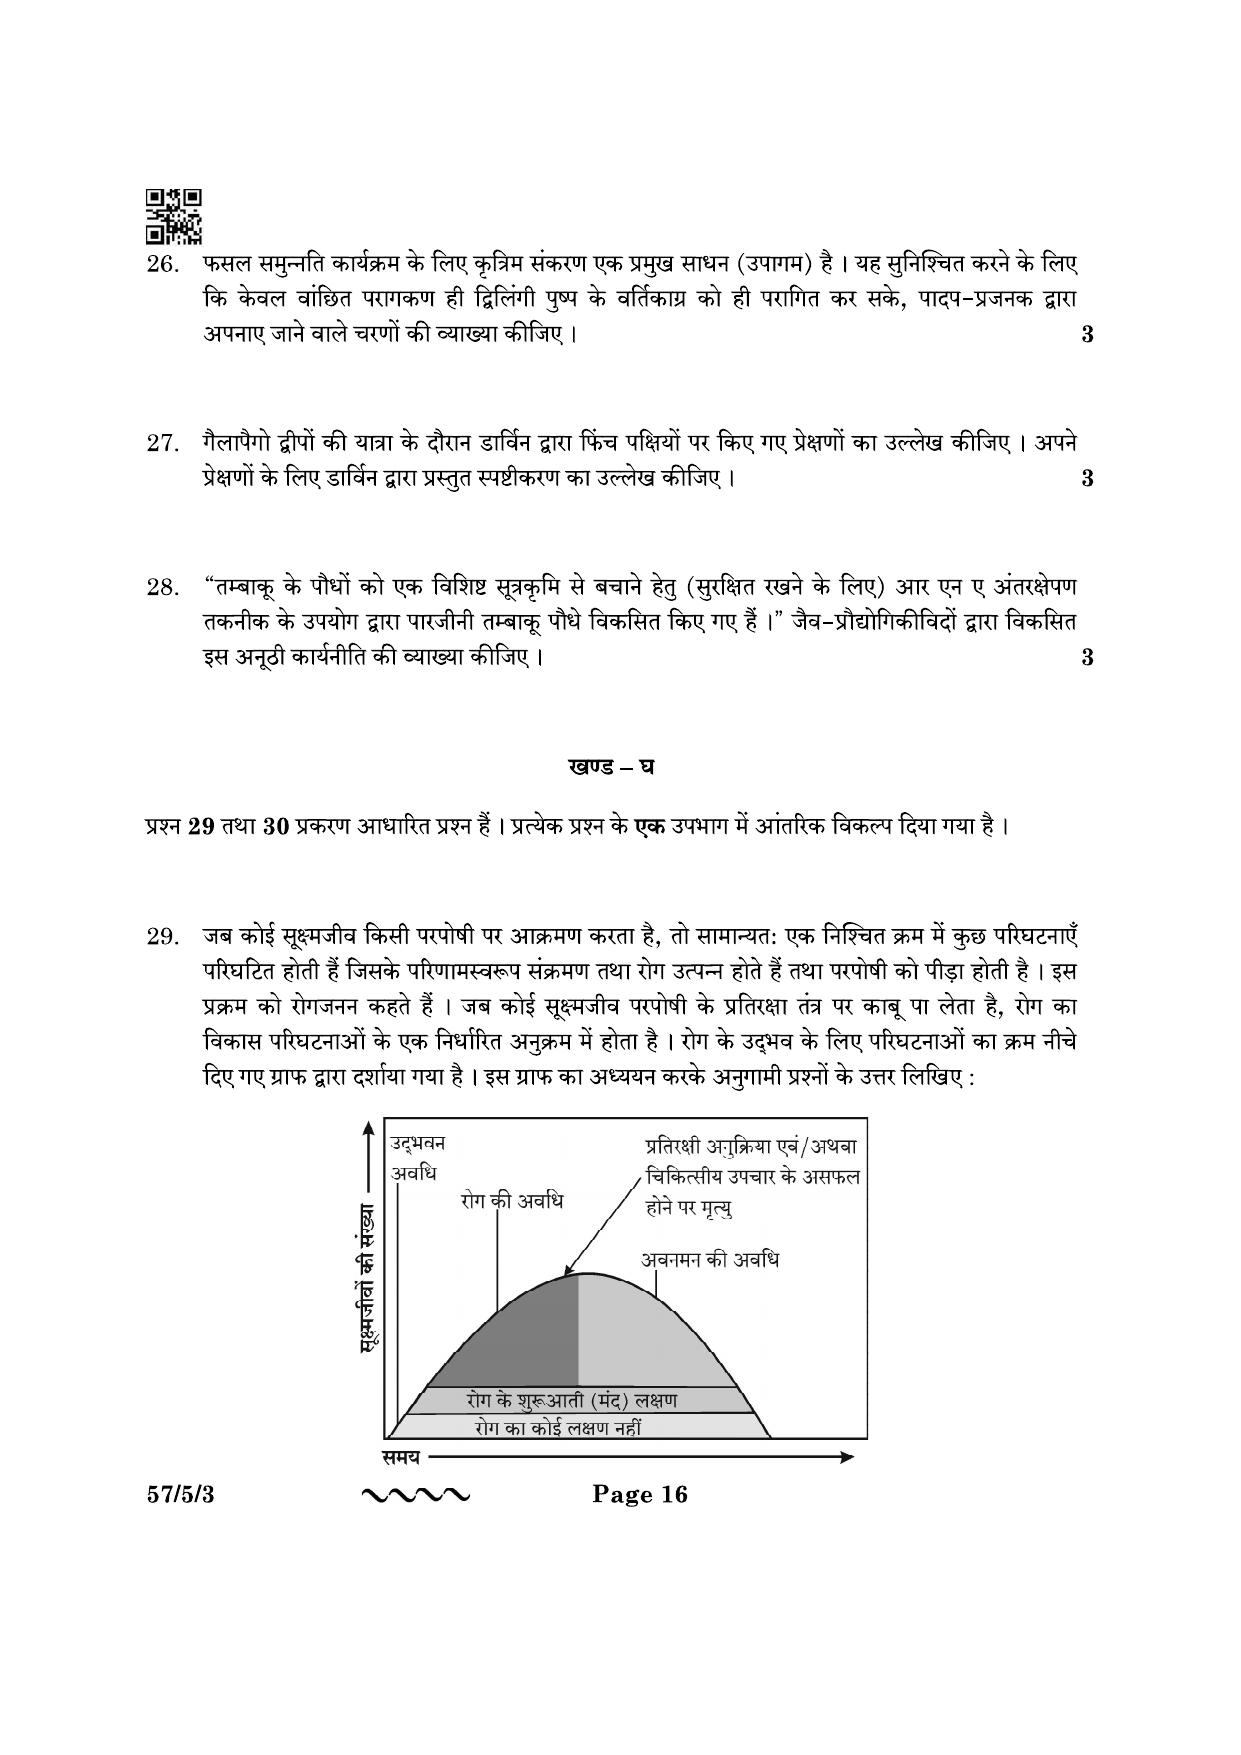 CBSE Class 12 57-5-3 Biology 2023 Question Paper - Page 16